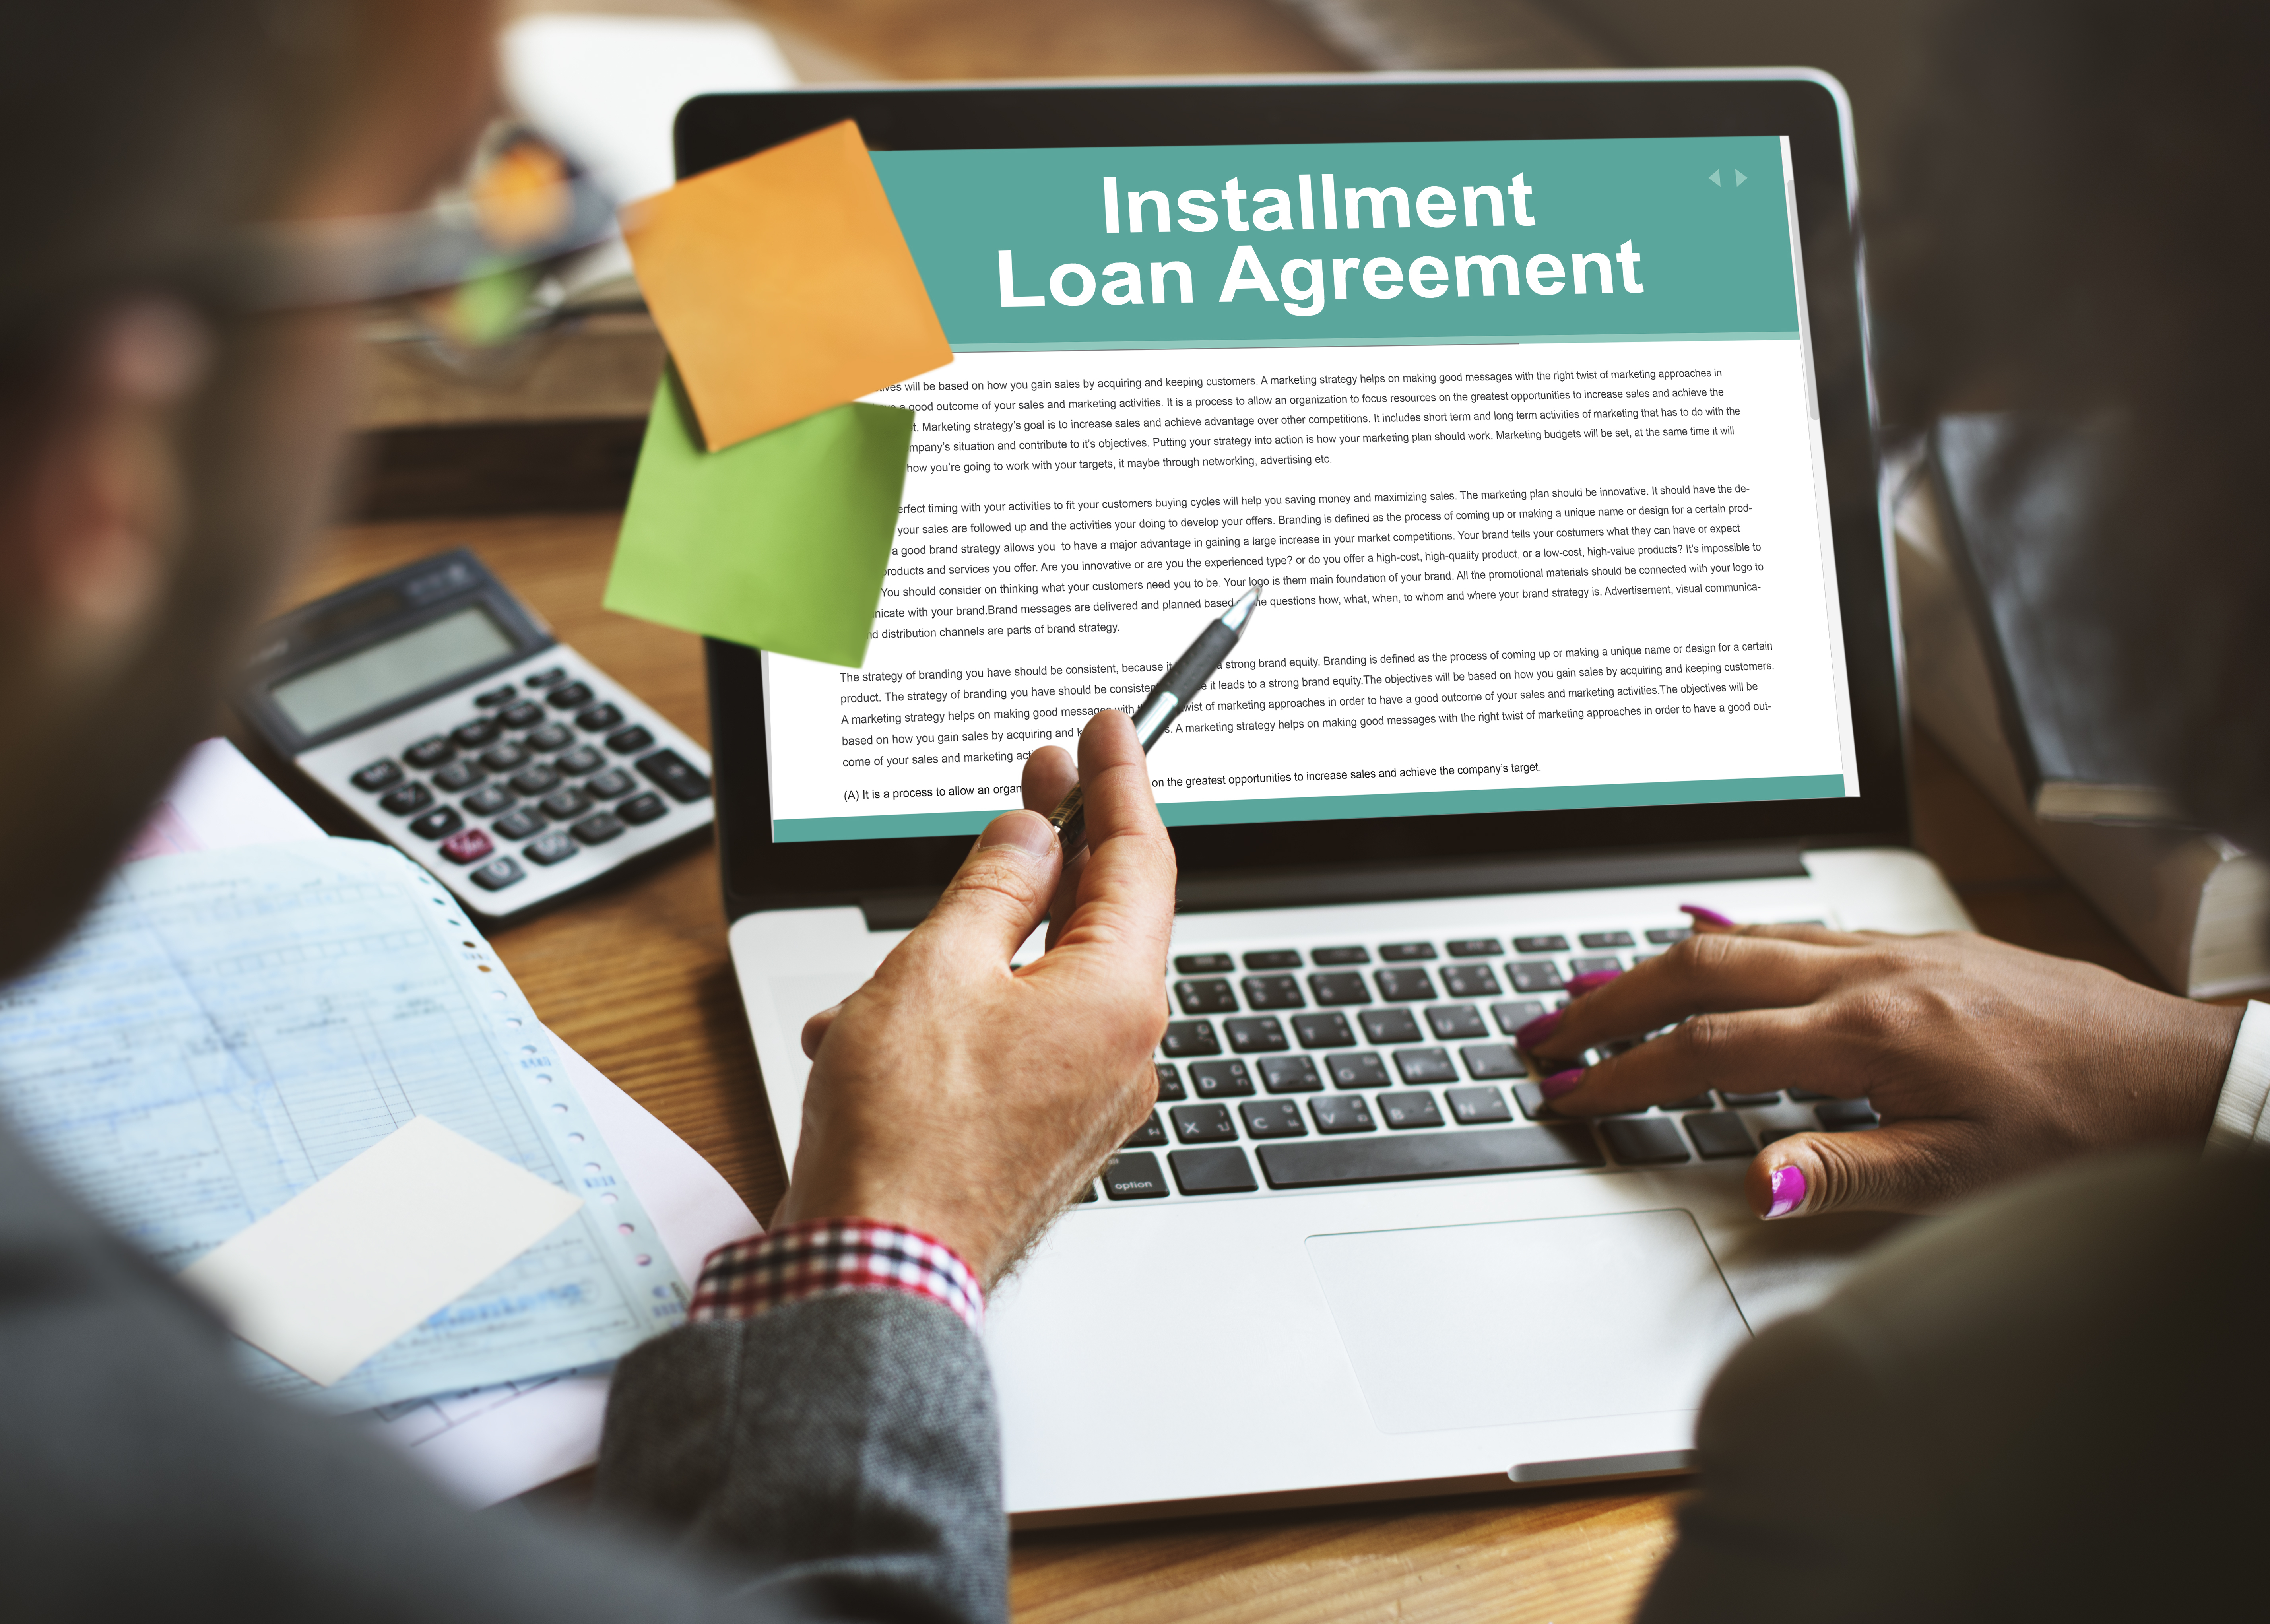 How Do Installment Loans Affect Your Credit?